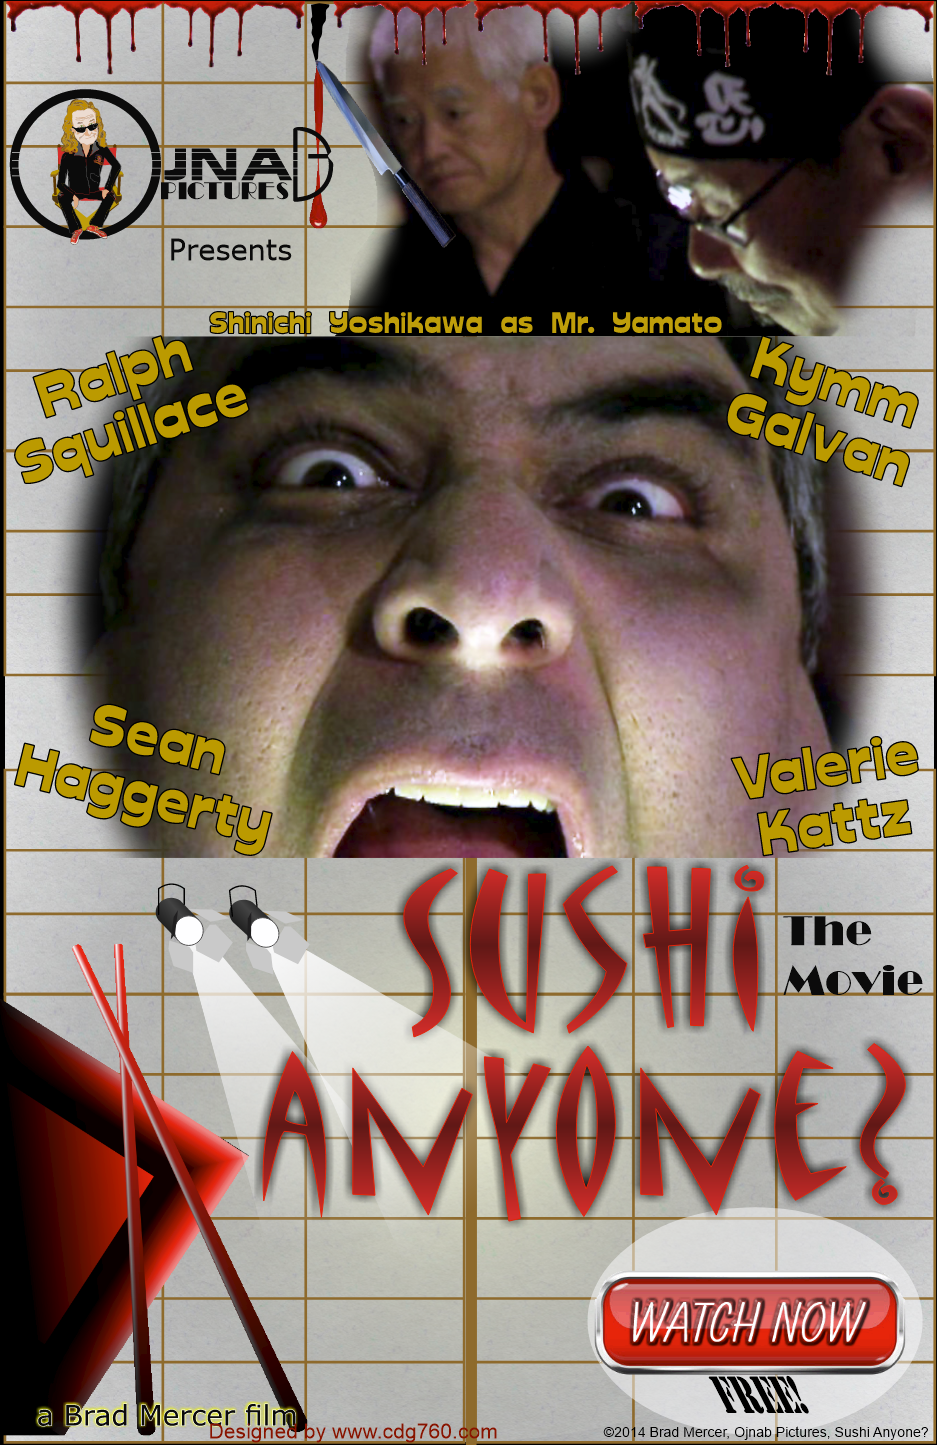 Sushi Anyone? POSTER link to full movie on YouTube